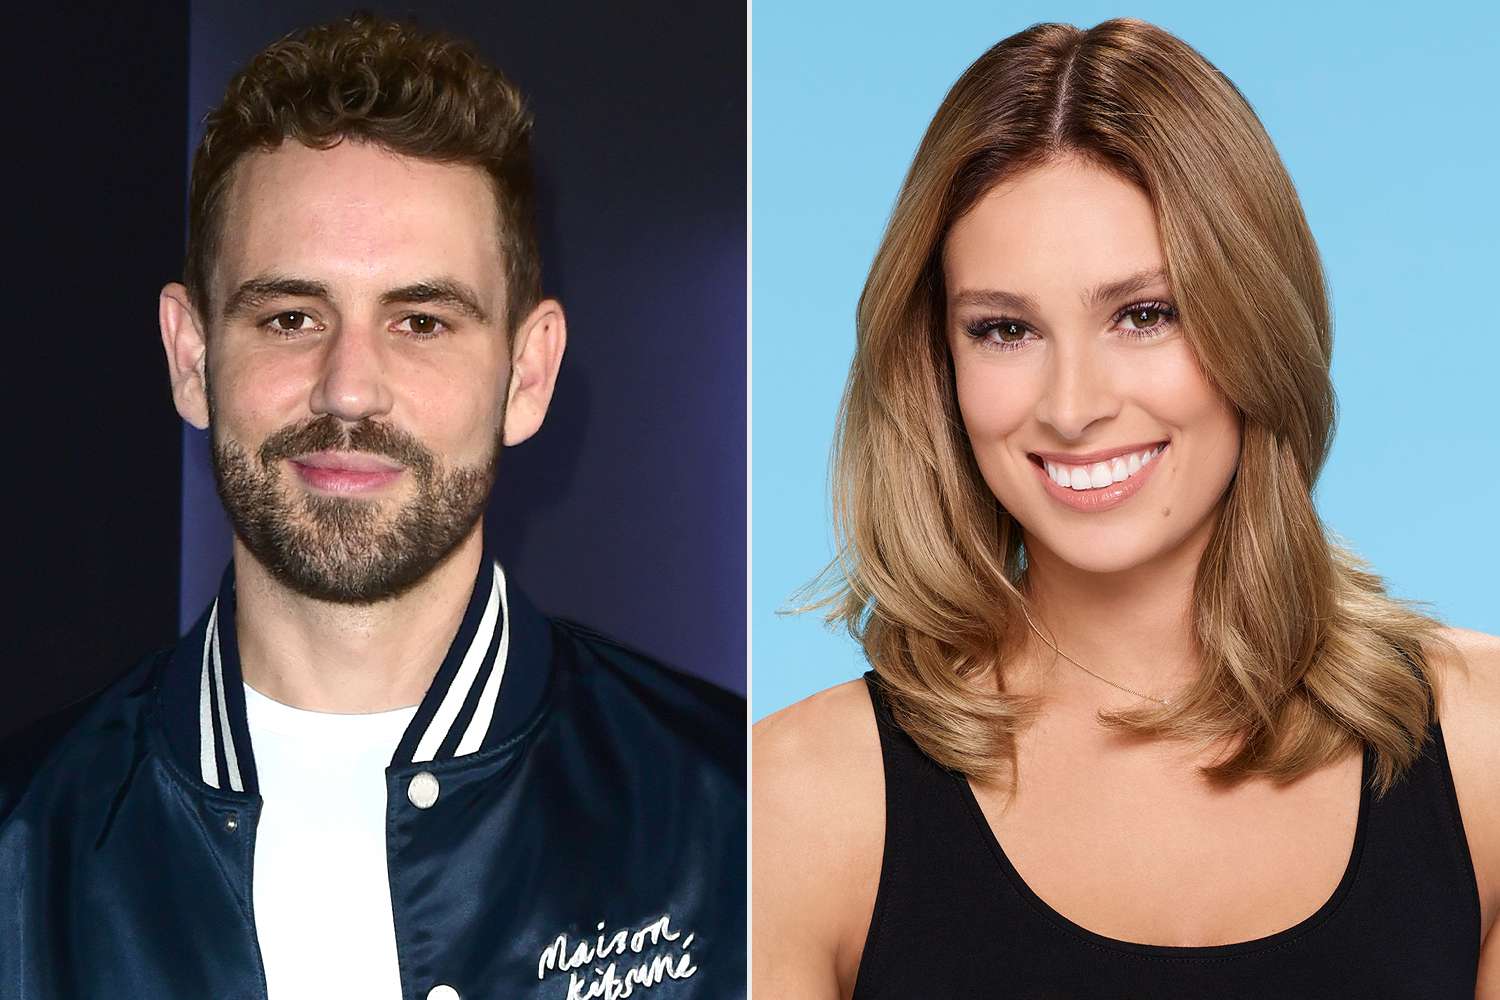 Nick Viall Says He 'Vividly Remembers' Late Hailey Merkt, Who Competed on His 'Bachelor' Season and Died from Cancer